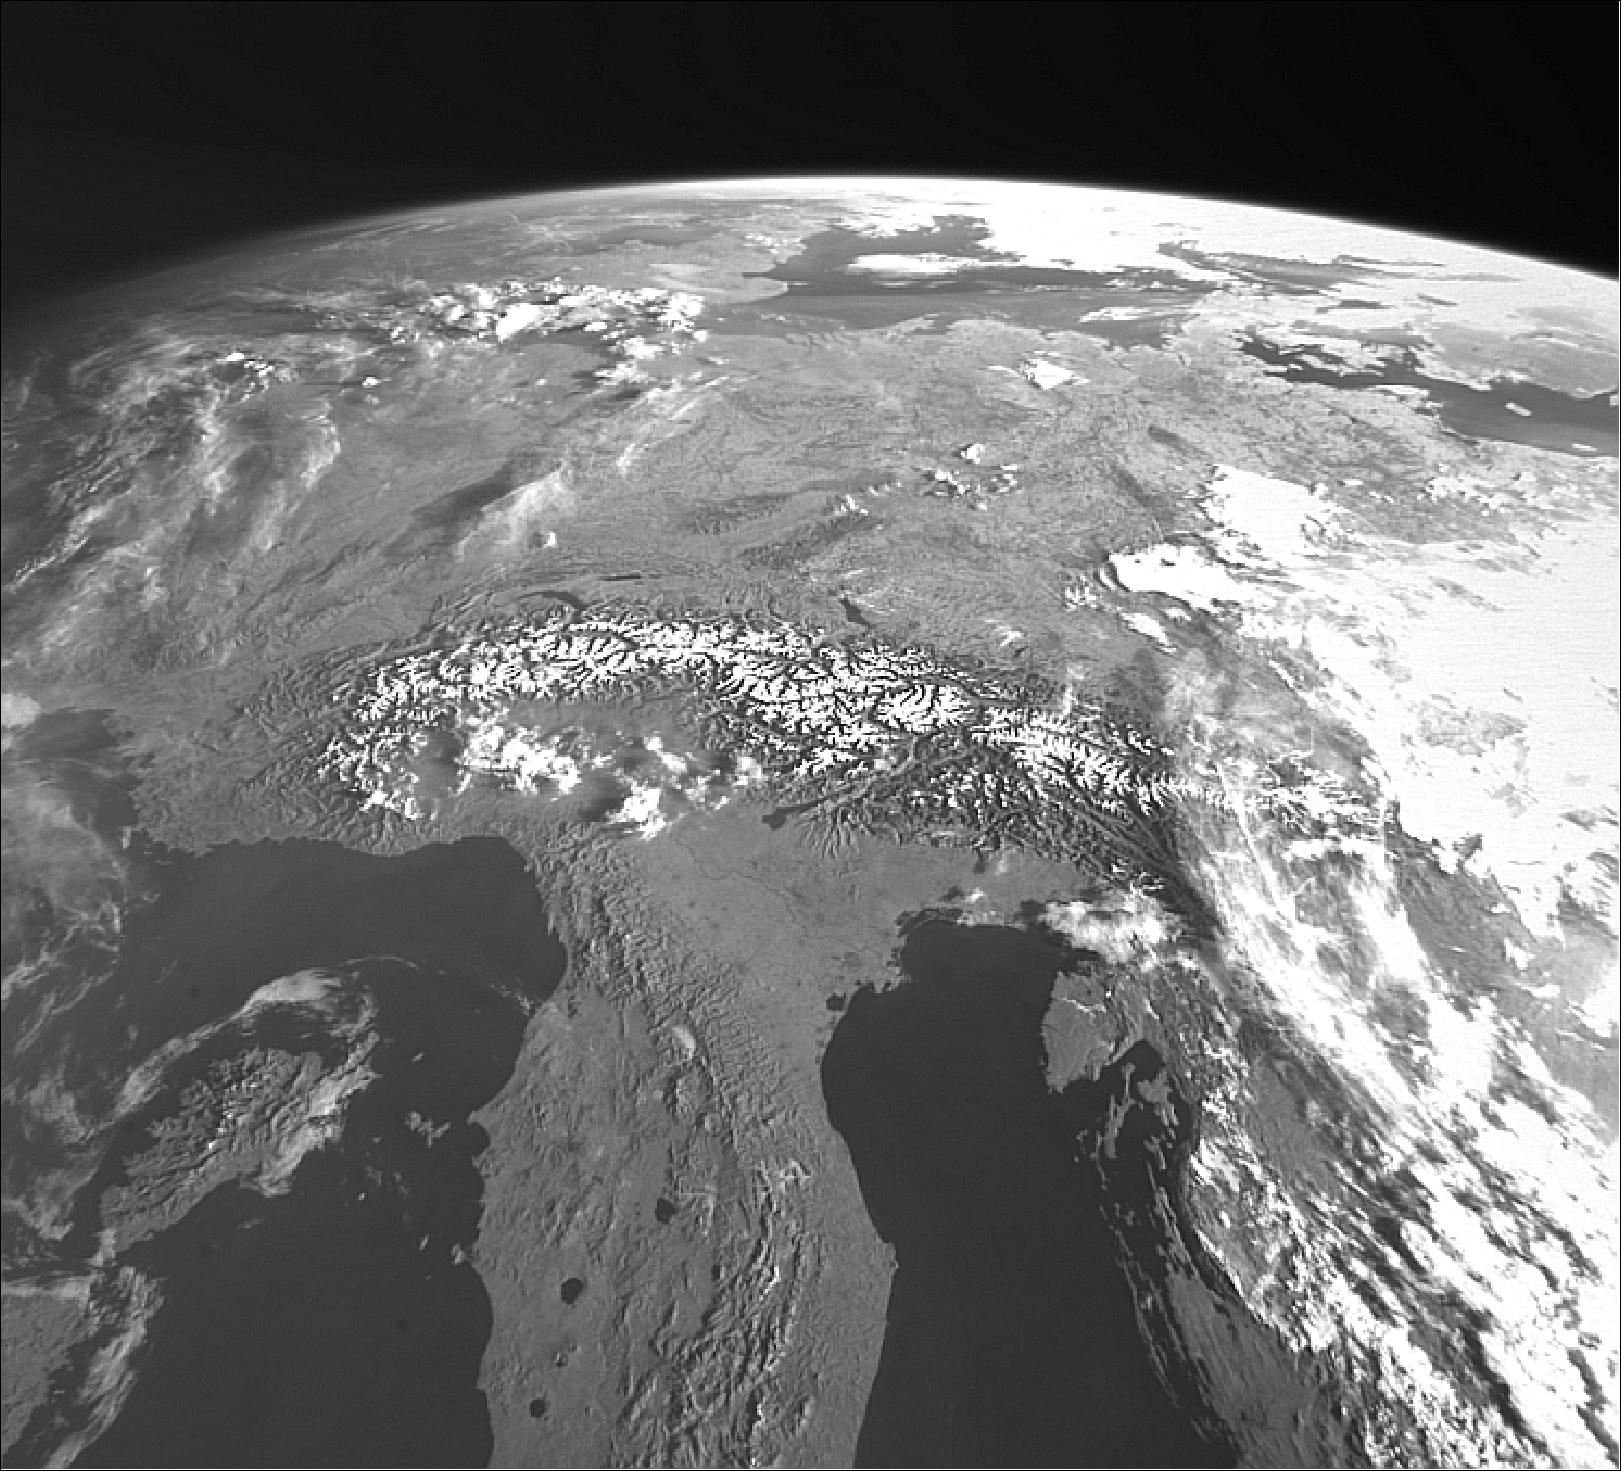 Figure 37: PROBA-2's X-Cam view of Europe acquired on June 7, 2013 (image credit: ESA)